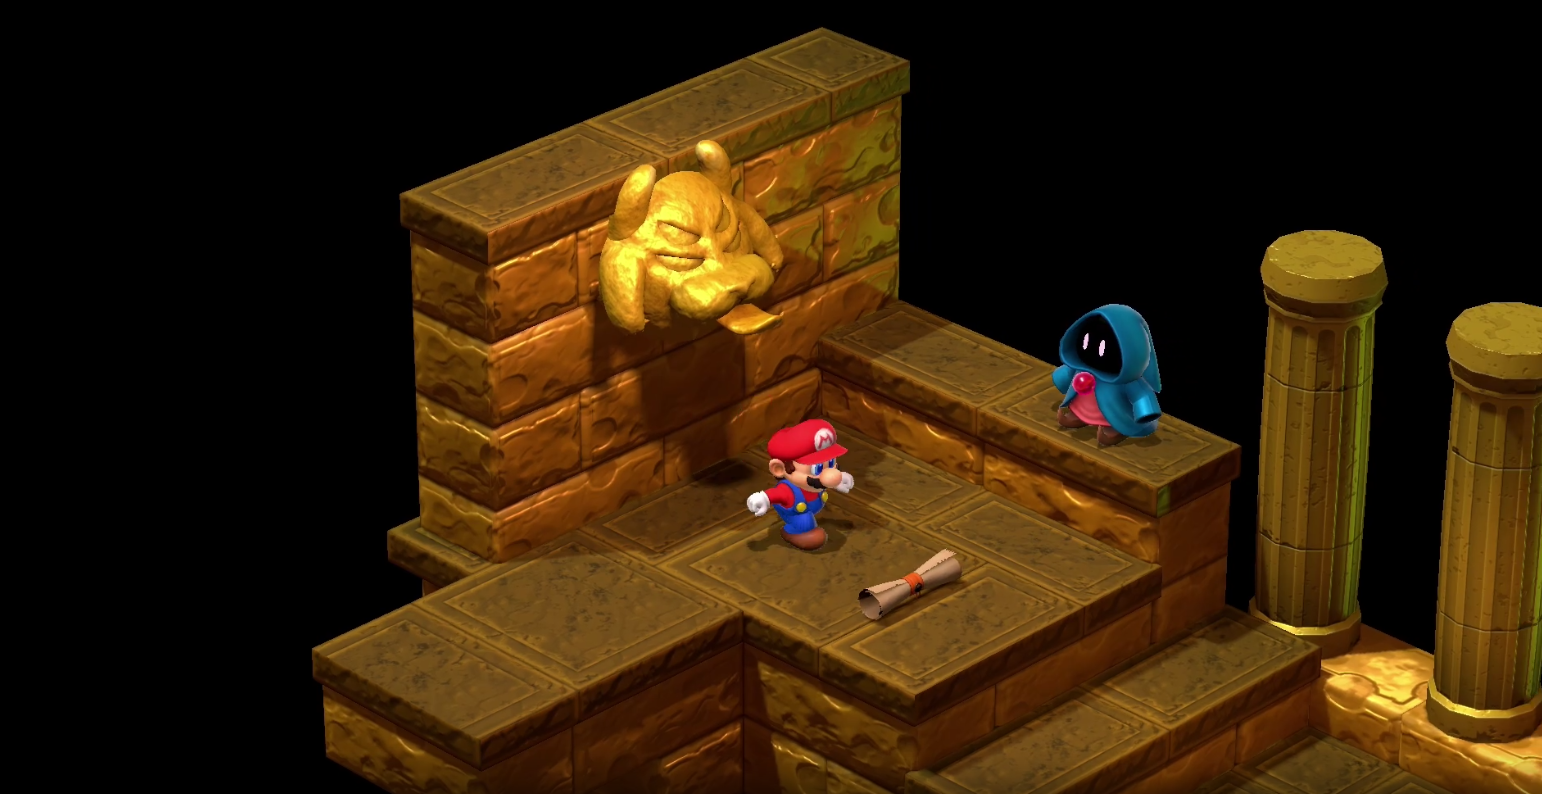 A dog statue in the Belome Temple giving Mario a fortune.